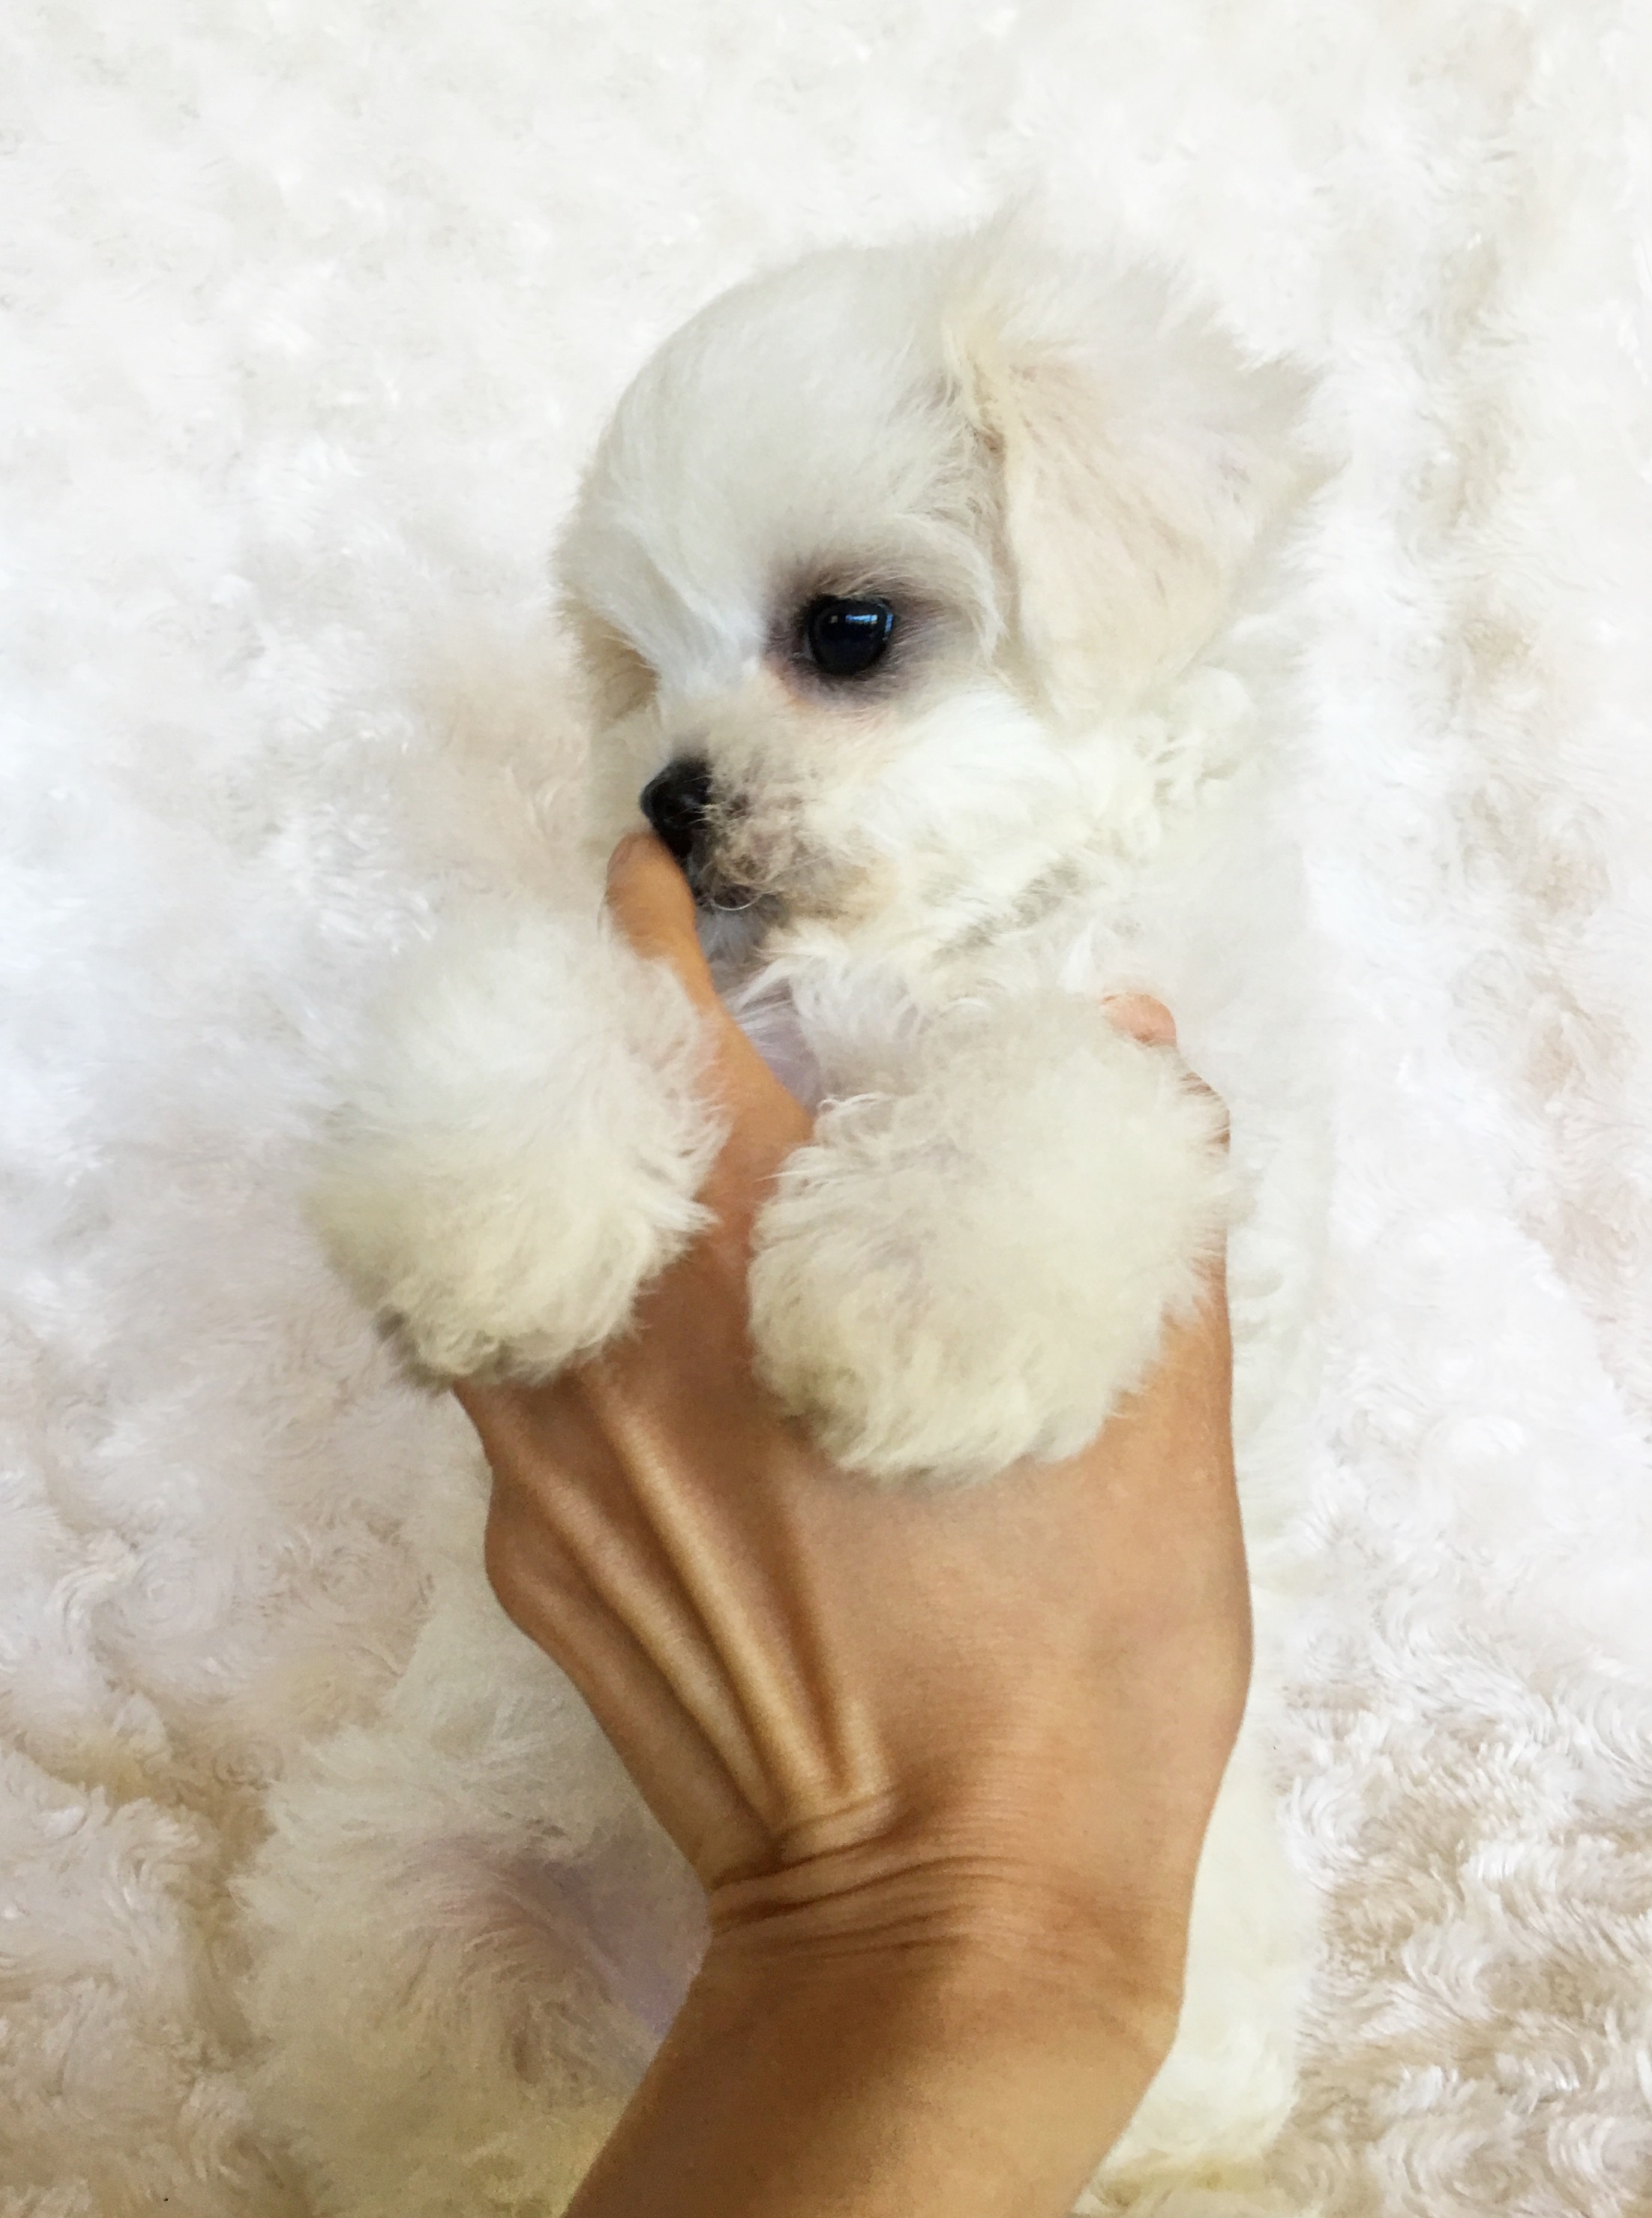 Teacup Maltipoo Puppy for sale "Marshmallow" | iHeartTeacups